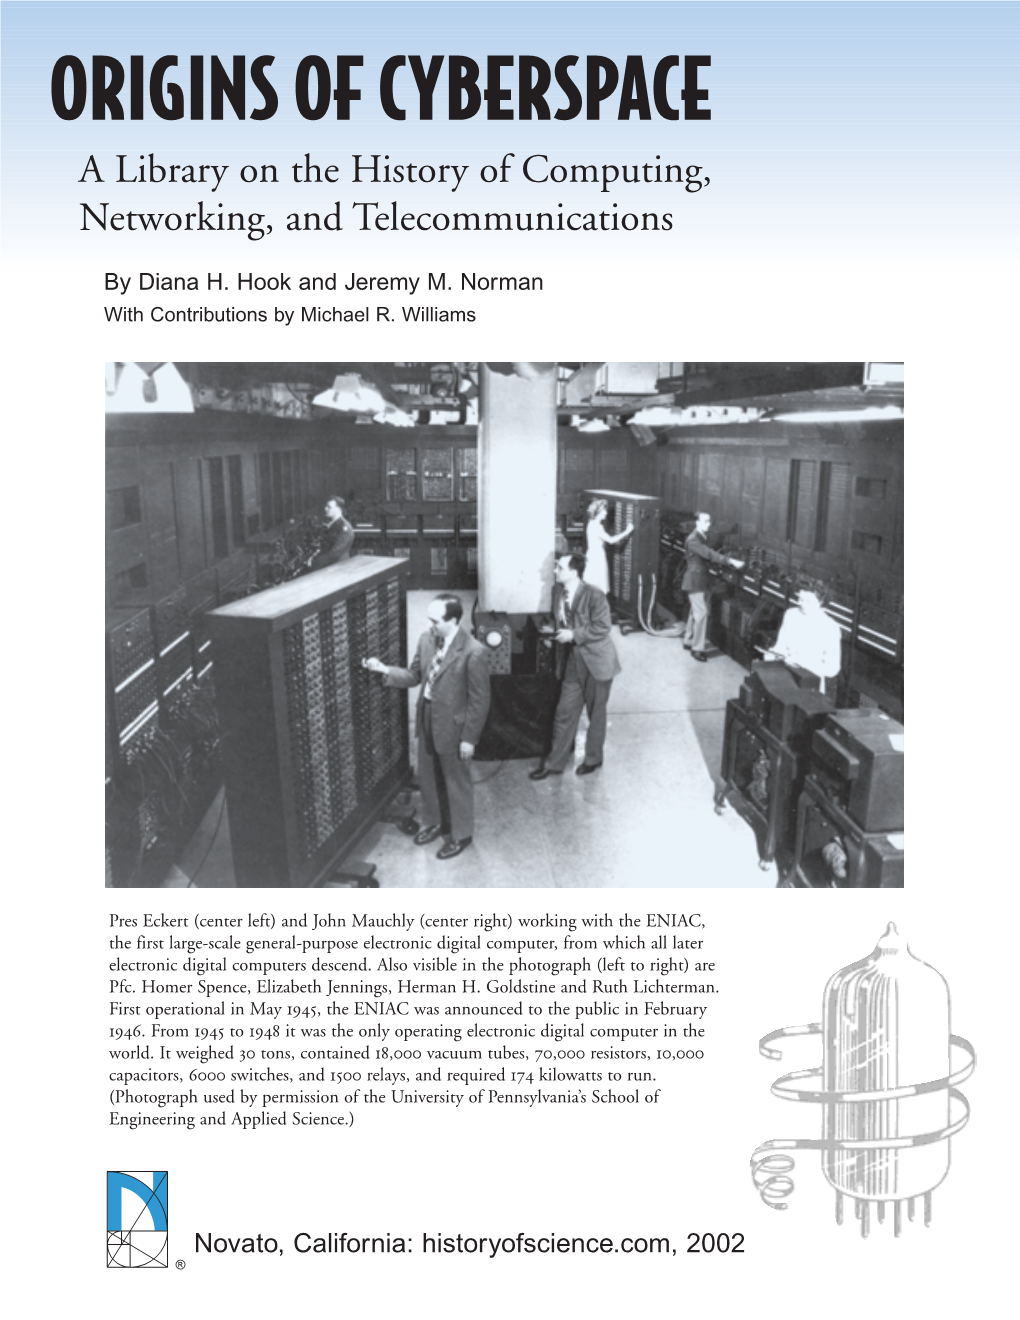 ORIGINS of CYBERSPACE a Library on the History of Computing, Networking, and Telecommunications